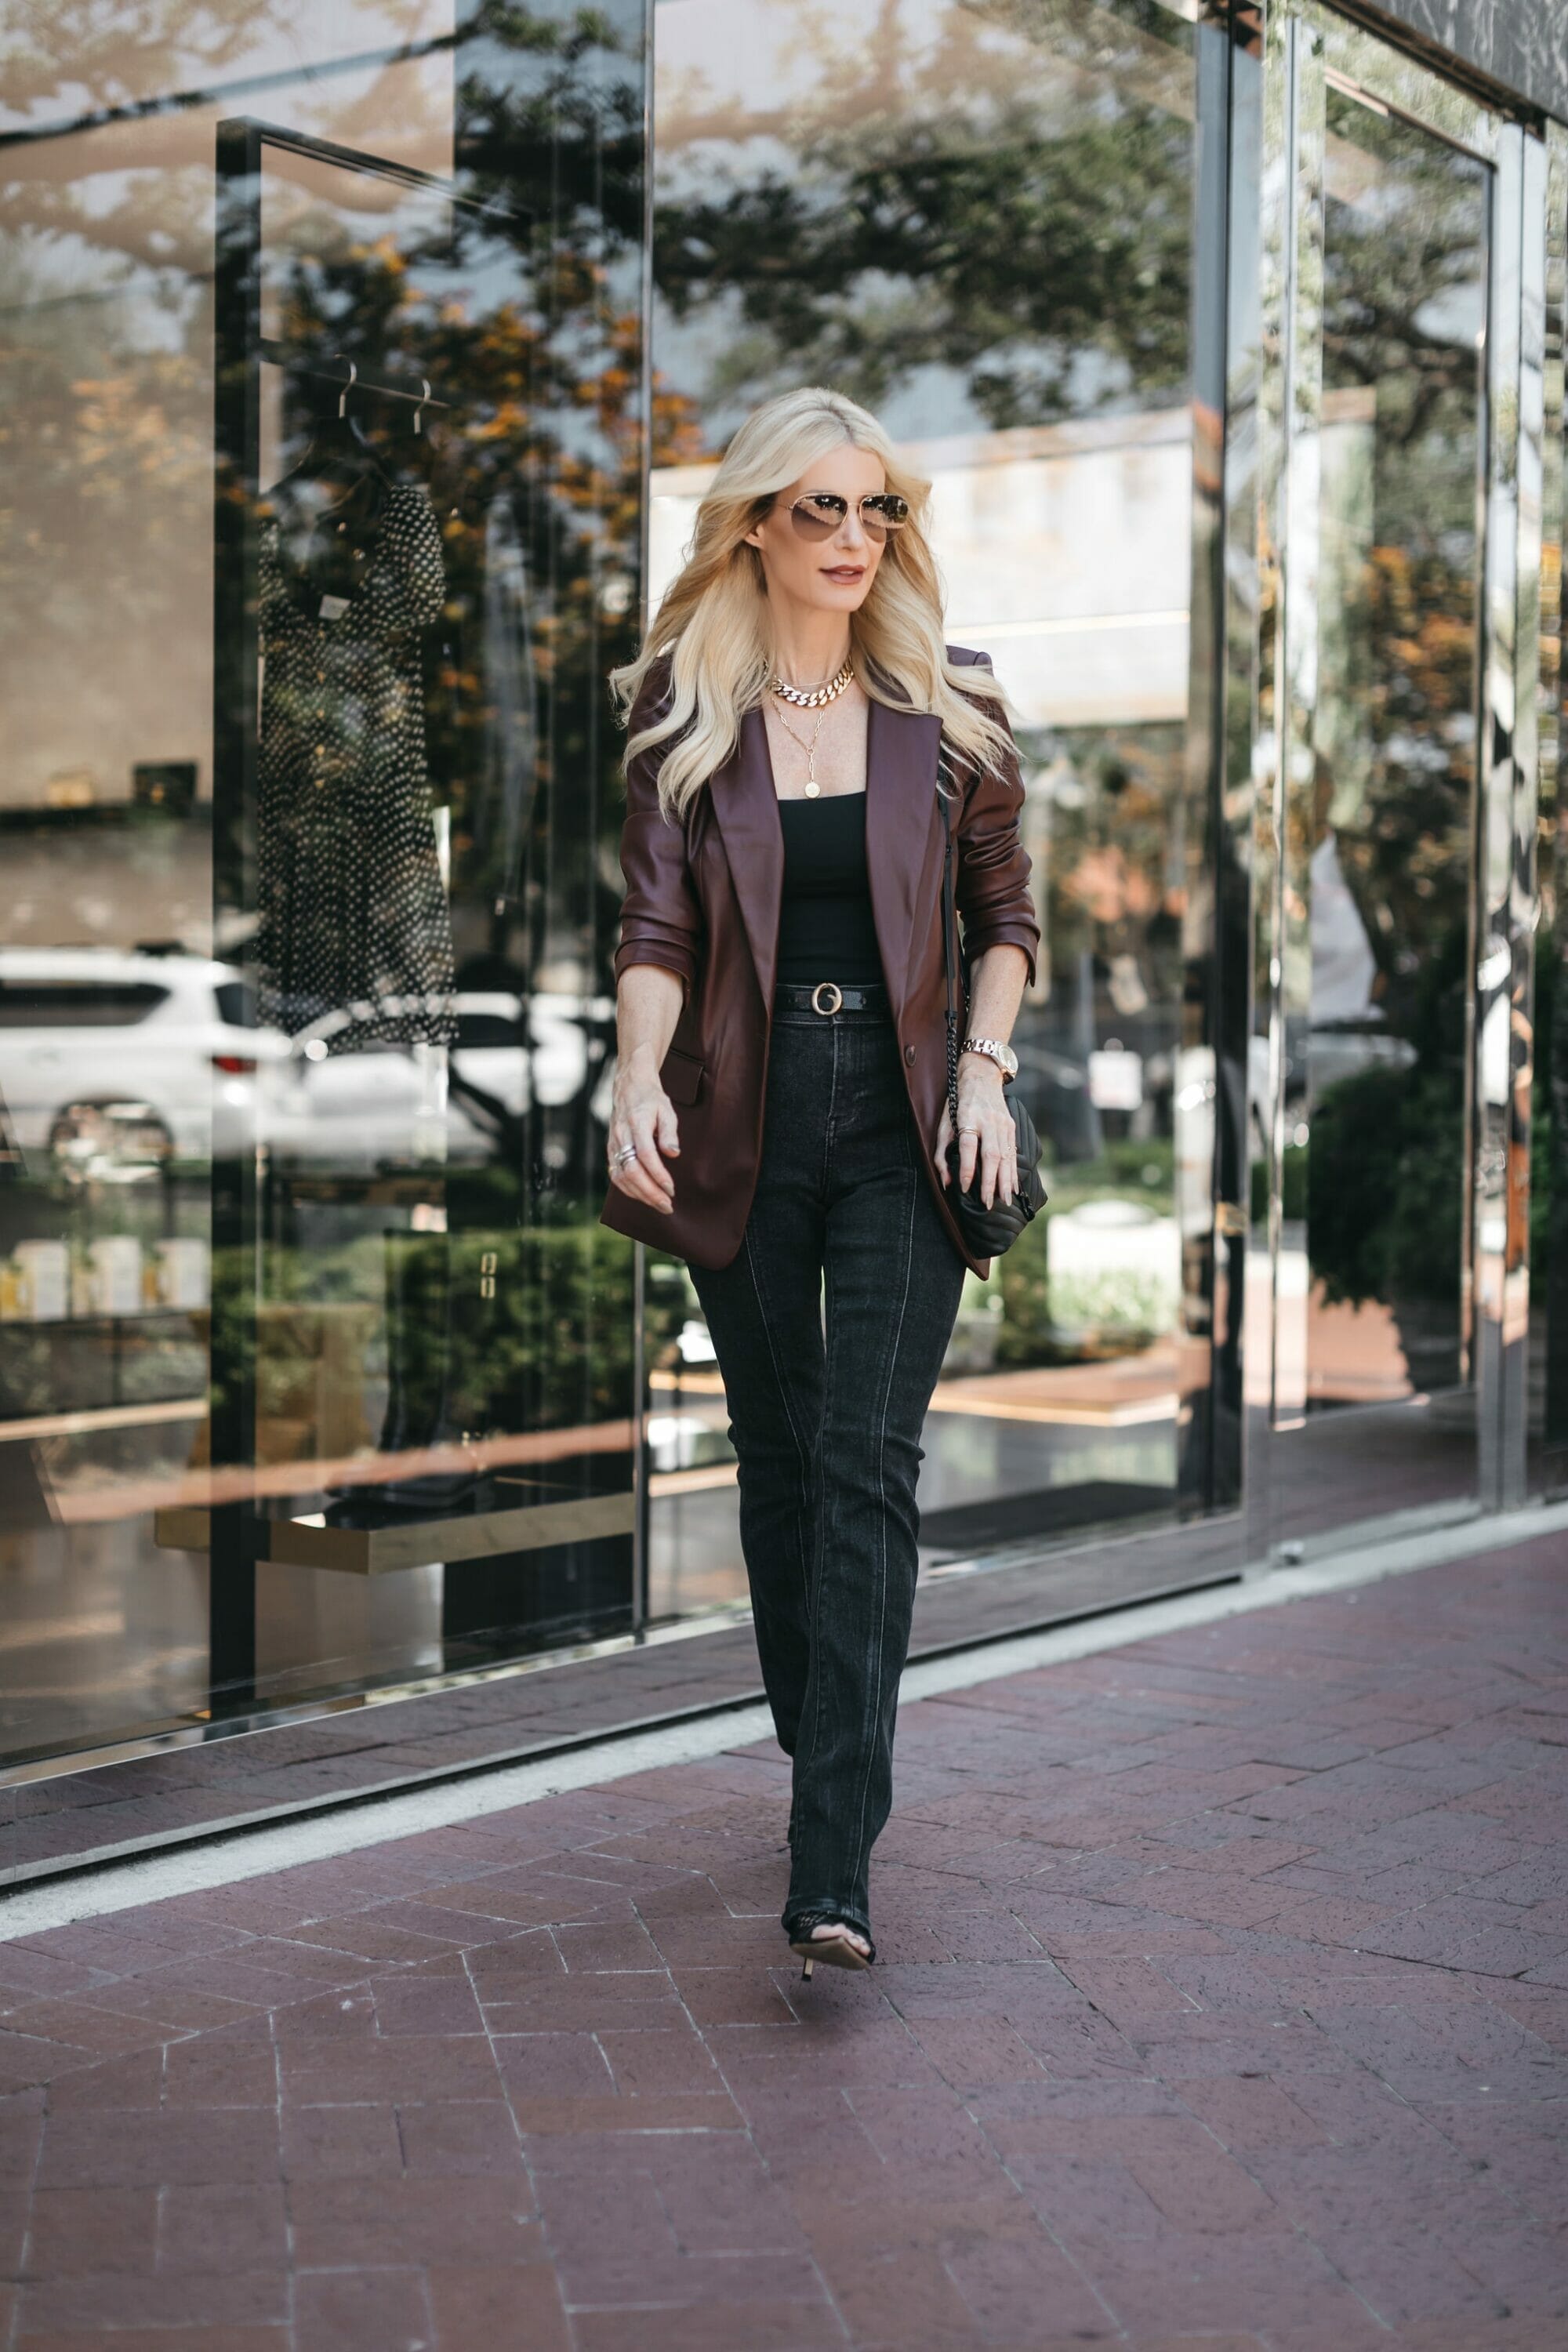 Over 40 fashion blogger wearing brown leather jacket with black faded deim and black heels.